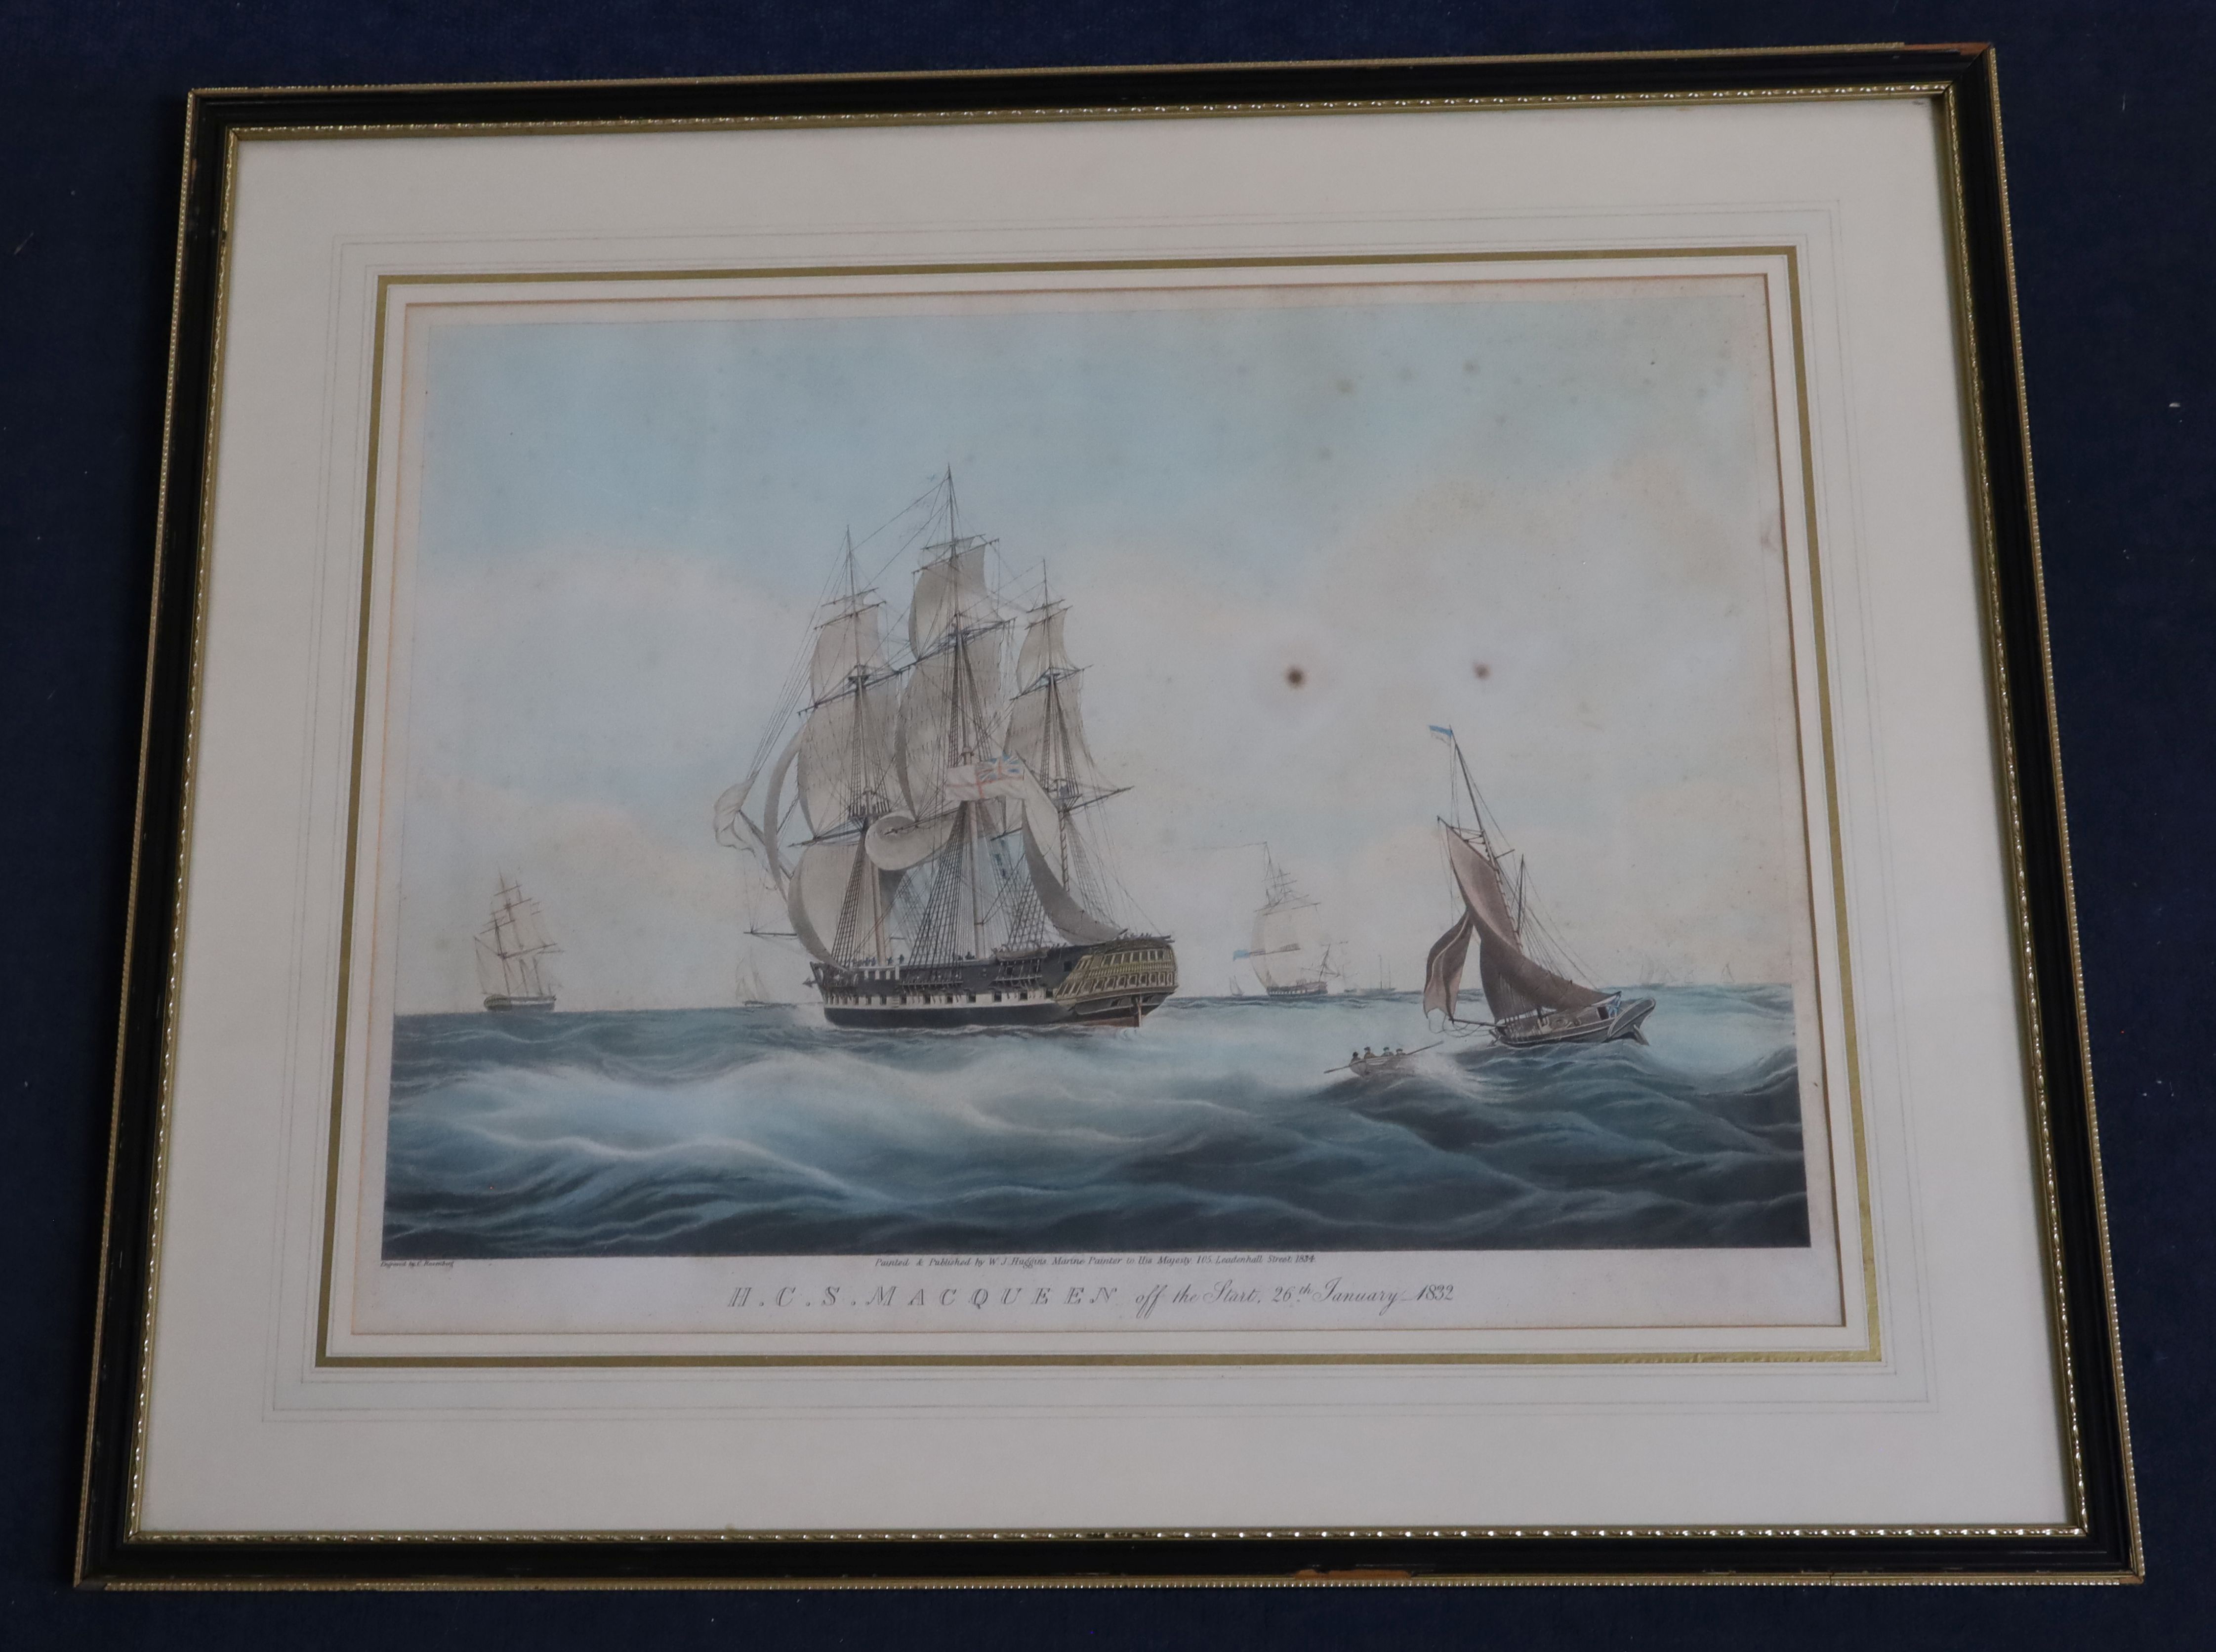 Rosenburg after Hugginscoloured aquatintH.C.S Macqueen off the Start, 26th Jan. 183215.75 x 20.5in. - Image 2 of 2